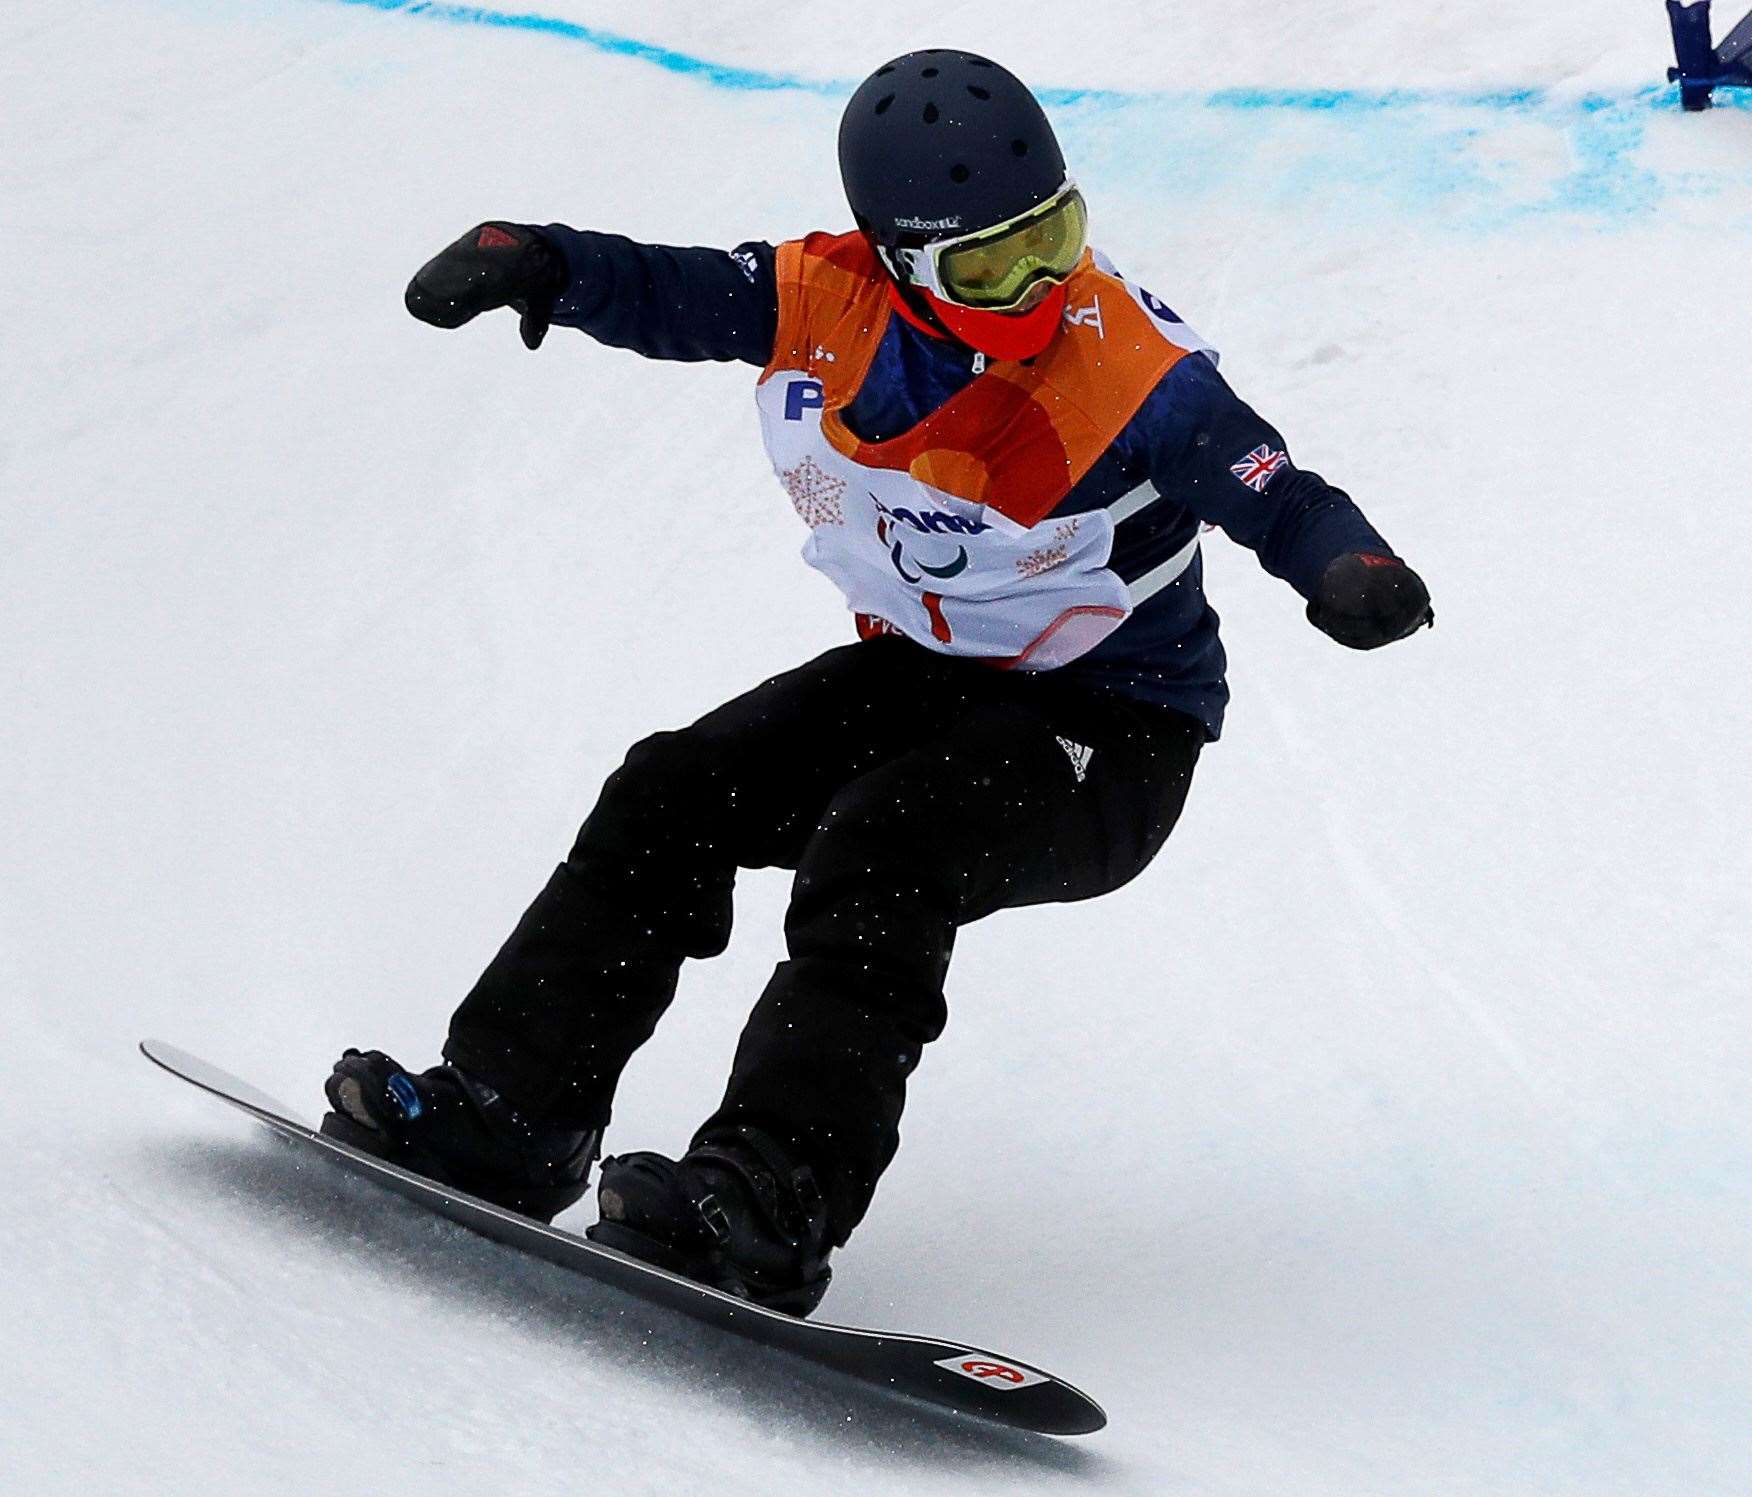 James Barnes-Miller in action at the Paralympics in PyeongChang in 2018. Picture: Reuters/Paul Hanna